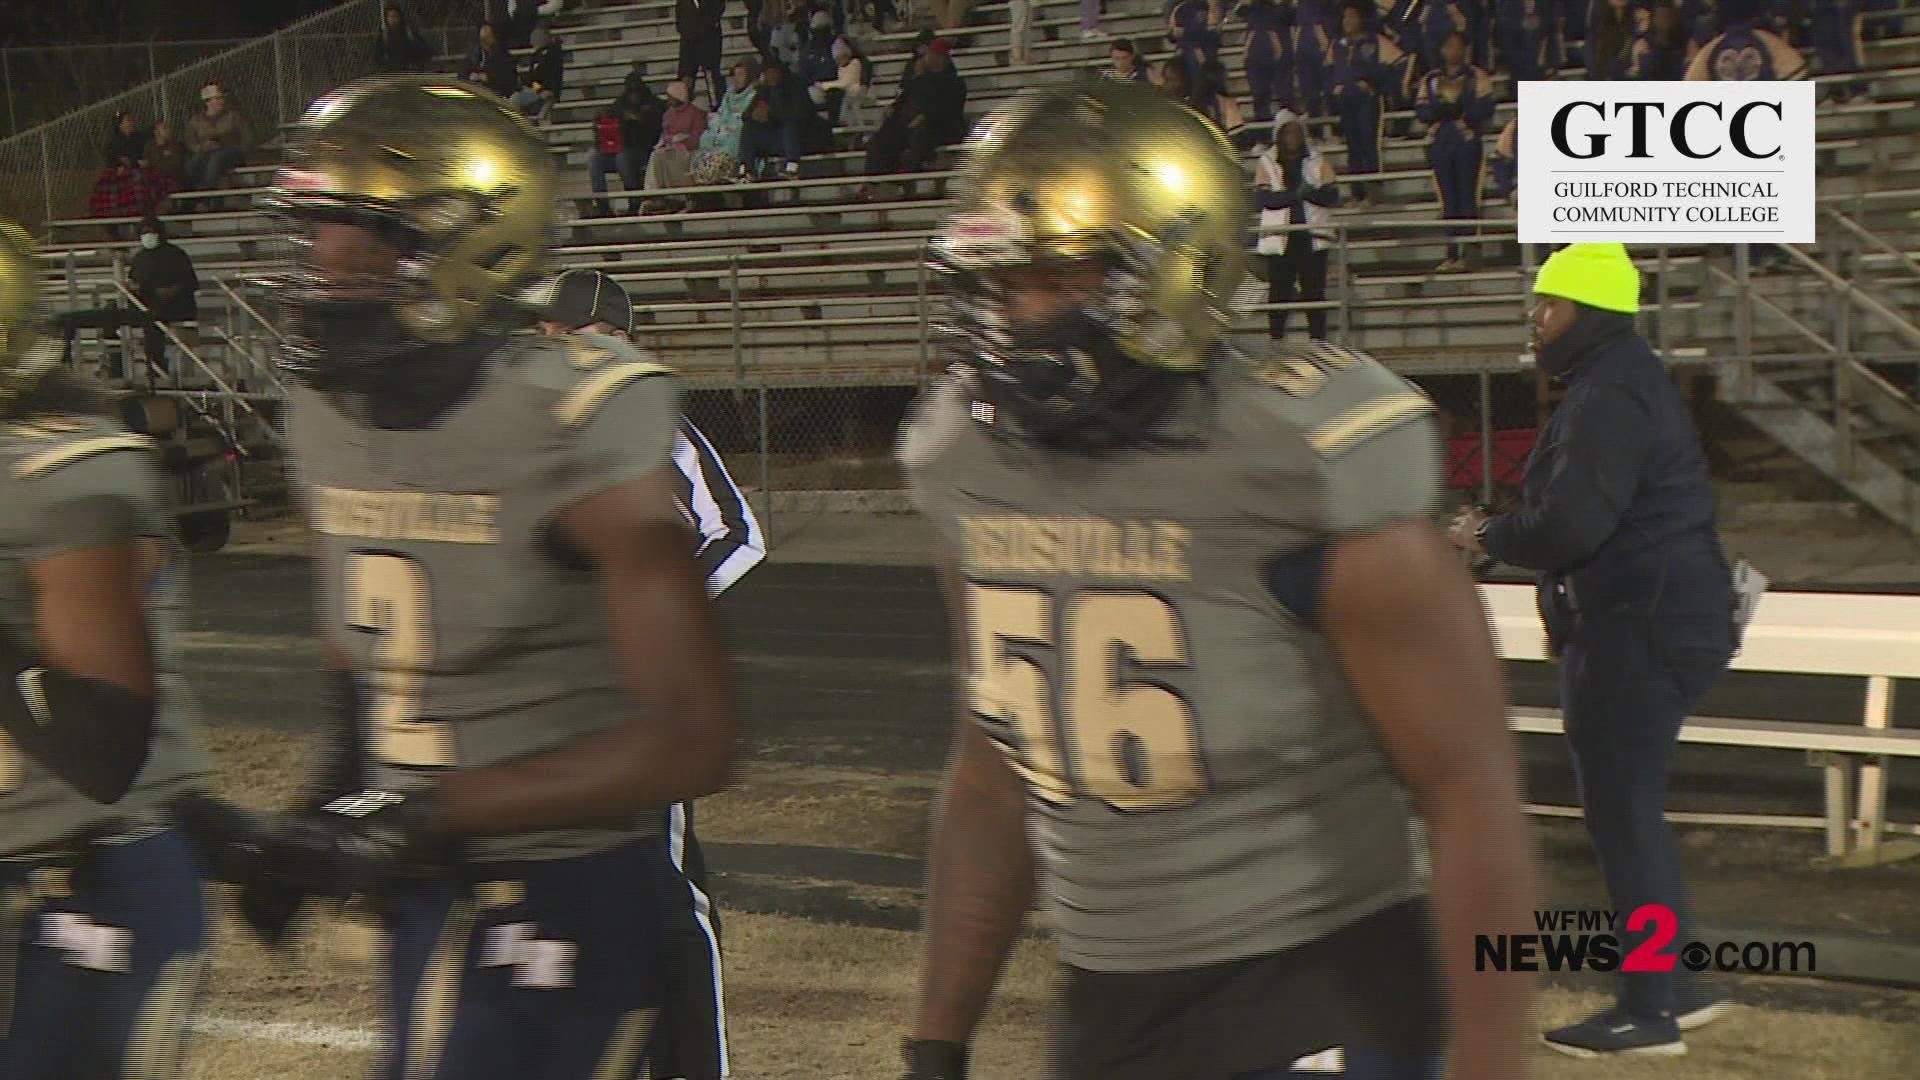 #1 Reidsville blanks #8 Chase. Rams advance to Round 4 of the 2A State Playoffs with the 30 to 0 win.